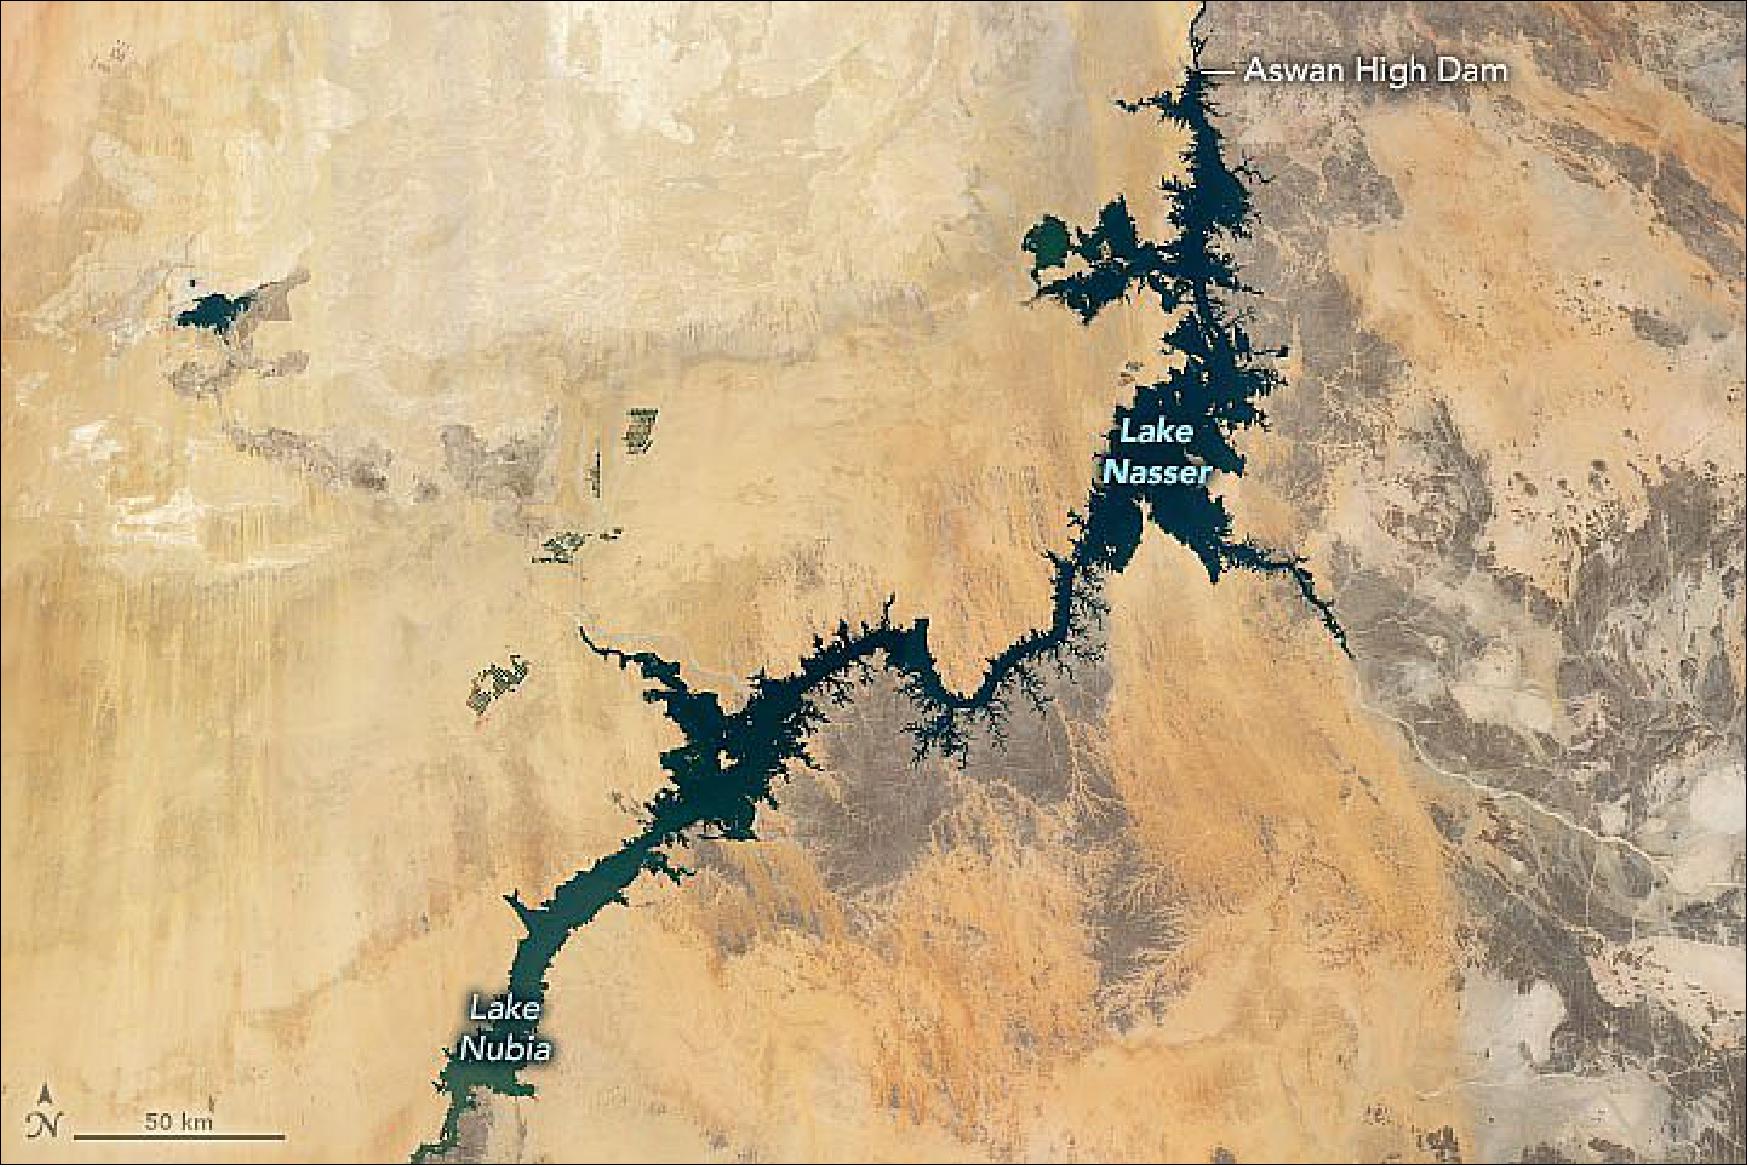 Figure 66: The Operational Land Imager (OLI) on Landsat 8 acquired the data for this natural-color image of Lake Nasser (the Sudanese call their portion Lake Nubia). This composite scene was compiled from cloud-free images from 2013 to 2020. Located in a hot, dry climate with sporadic rain events, the lake loses a lot of water through evaporation and consequently shrinks seasonally in surface area. Water levels are typically highest in November during the flood season and lowest in July during the dry season (image credit: NASA Earth Observatory, image by Joshua Stevens, using Landsat data from the U.S. Geological Survey. Story by Kasha Patel)